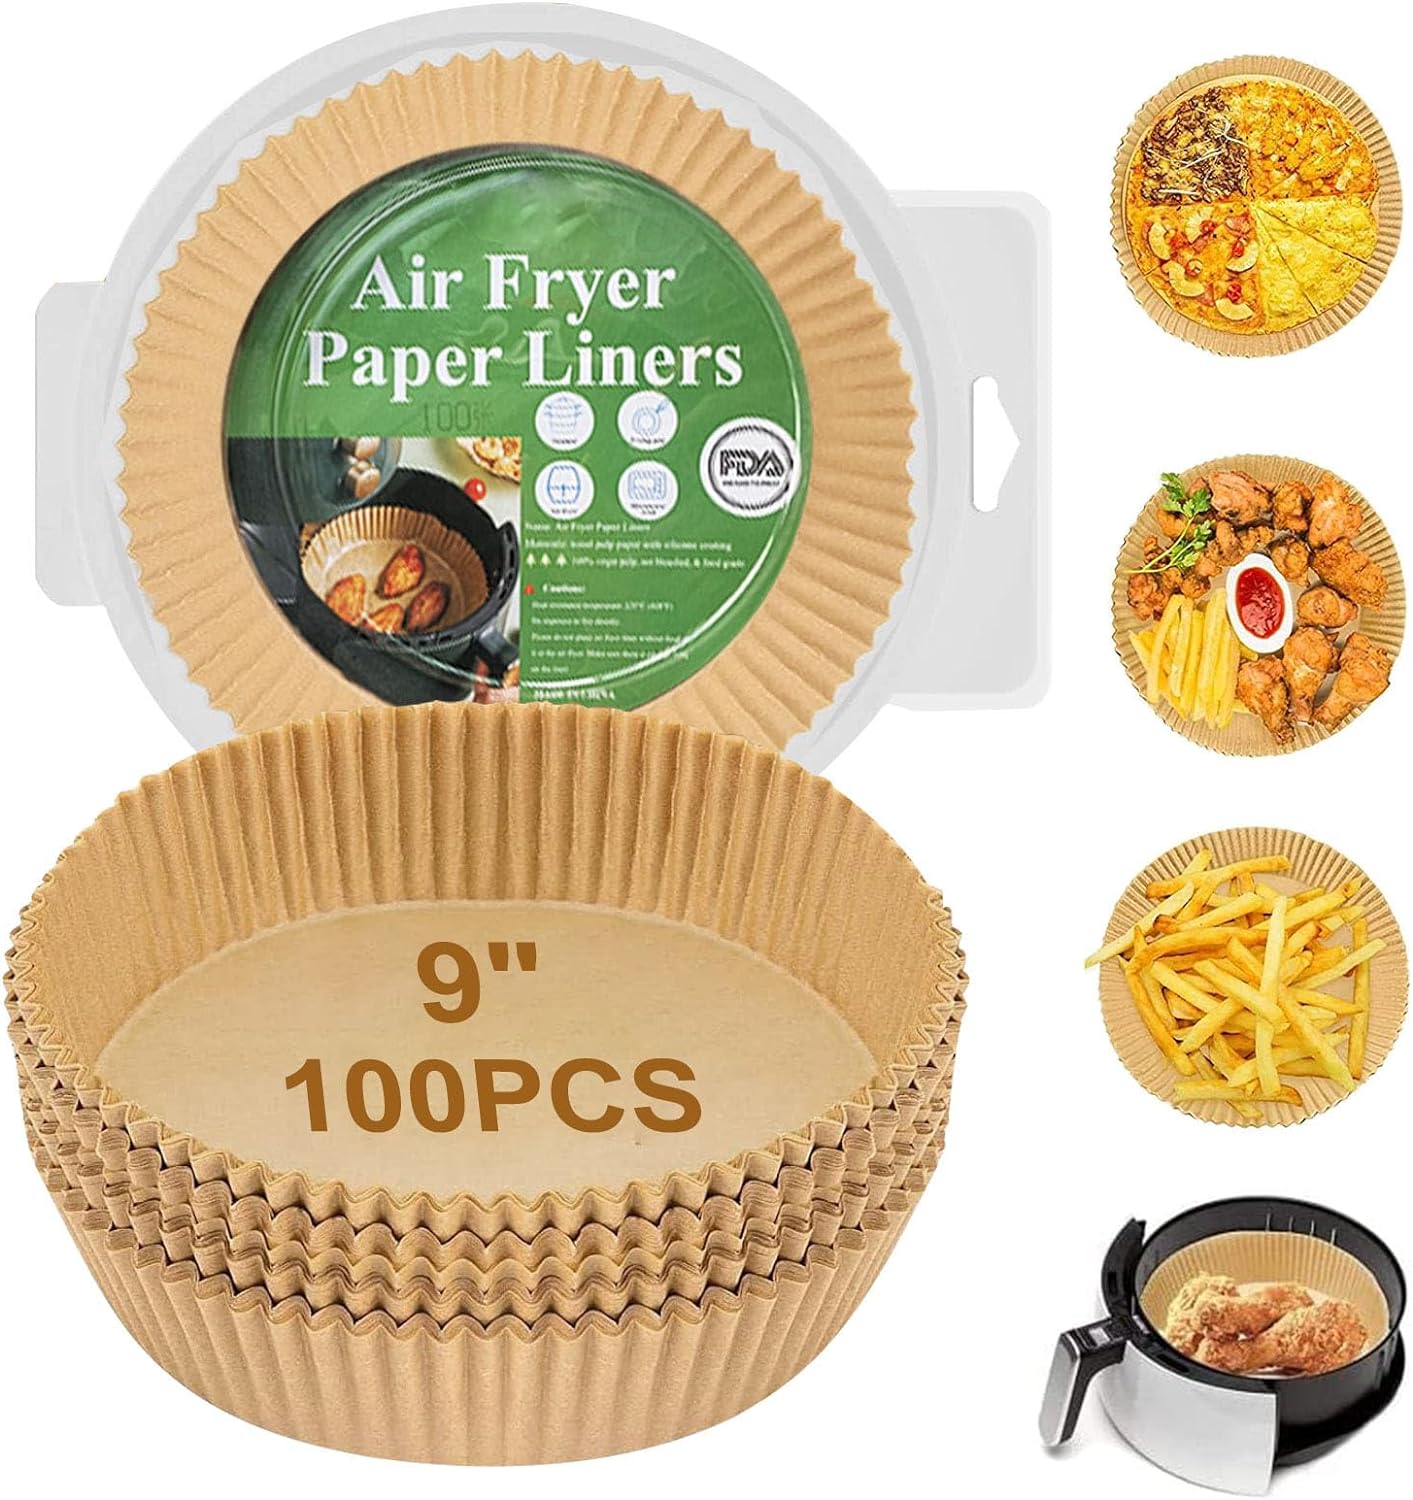 I absolutely love these air fryer liners. I use them every time I air fry food. They are so easy to use. I use either one or two in my Ninja Foodie depending on what I'm cooking. Not only are they easy to use, but clean up is a breeze. I would highly recommend these liners.